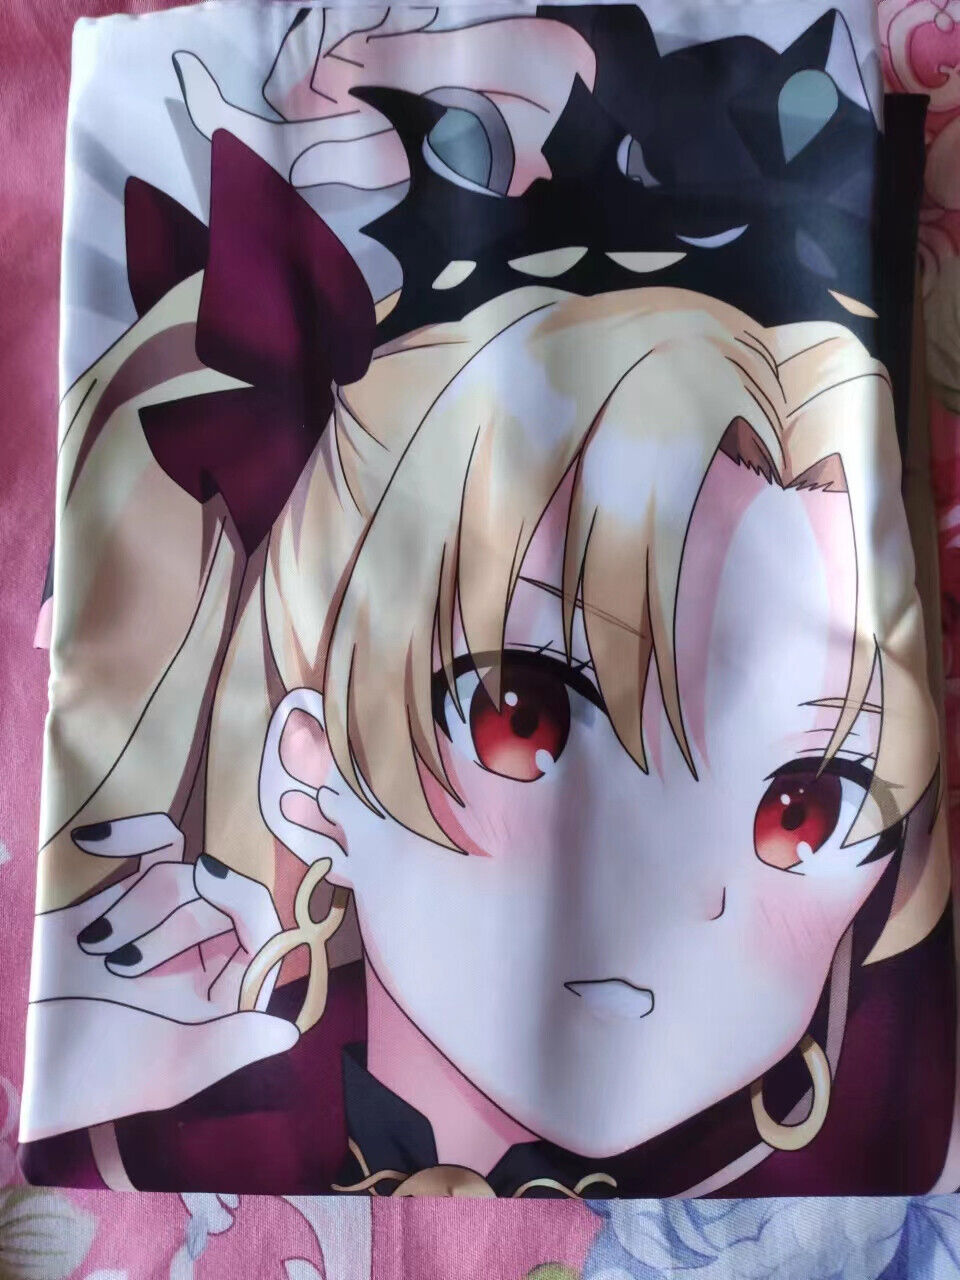 Magnificent New 59″ FATE Ereshkigal Anime Hugging Body Pillow Case Cover on eBay